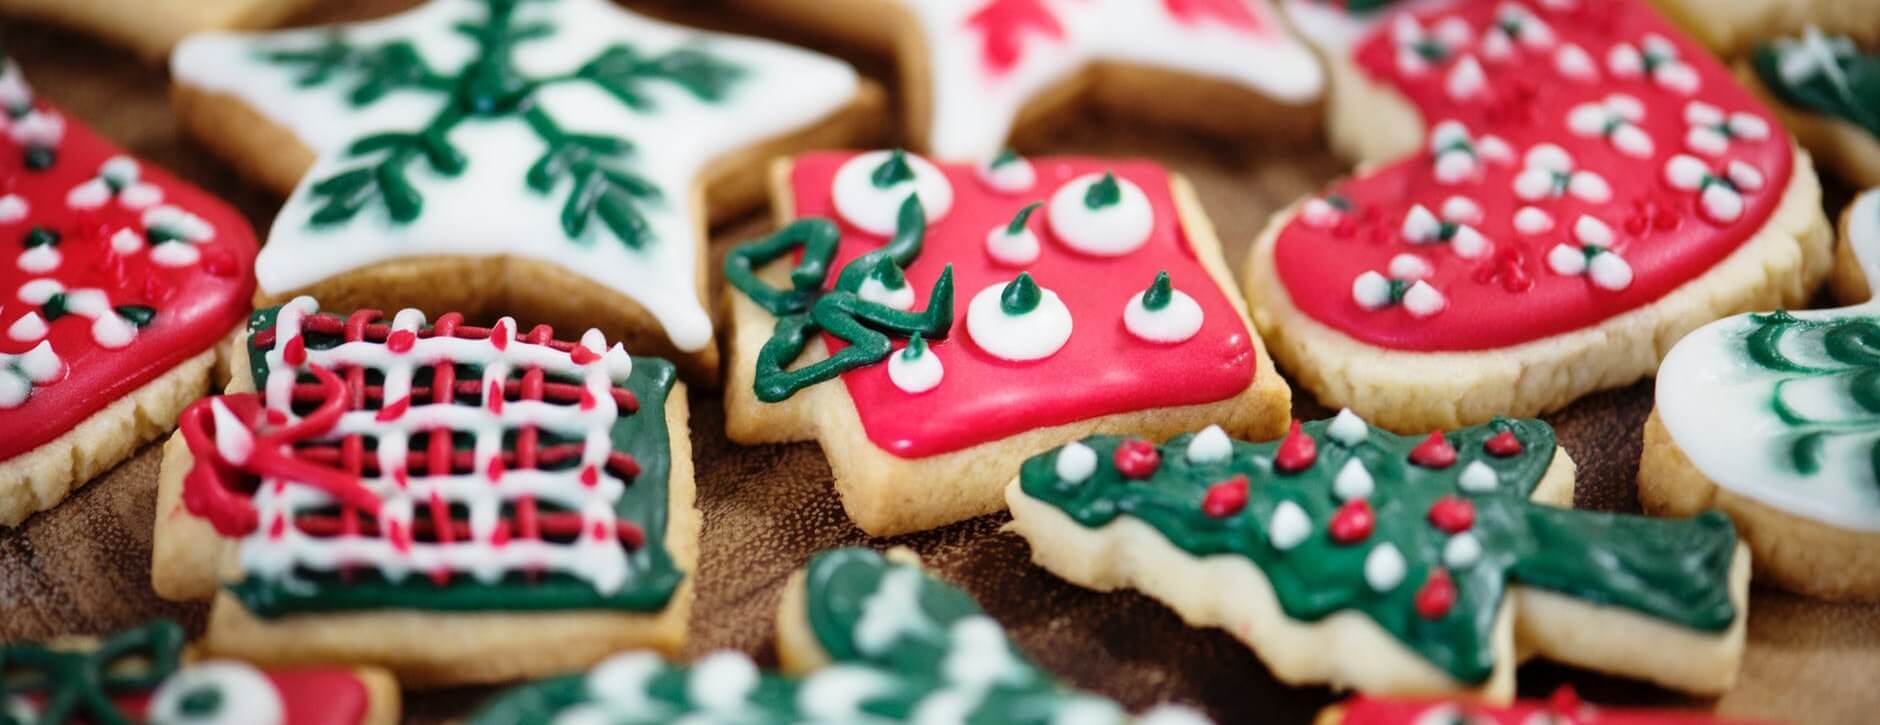 7 tips for a healthier Christmas